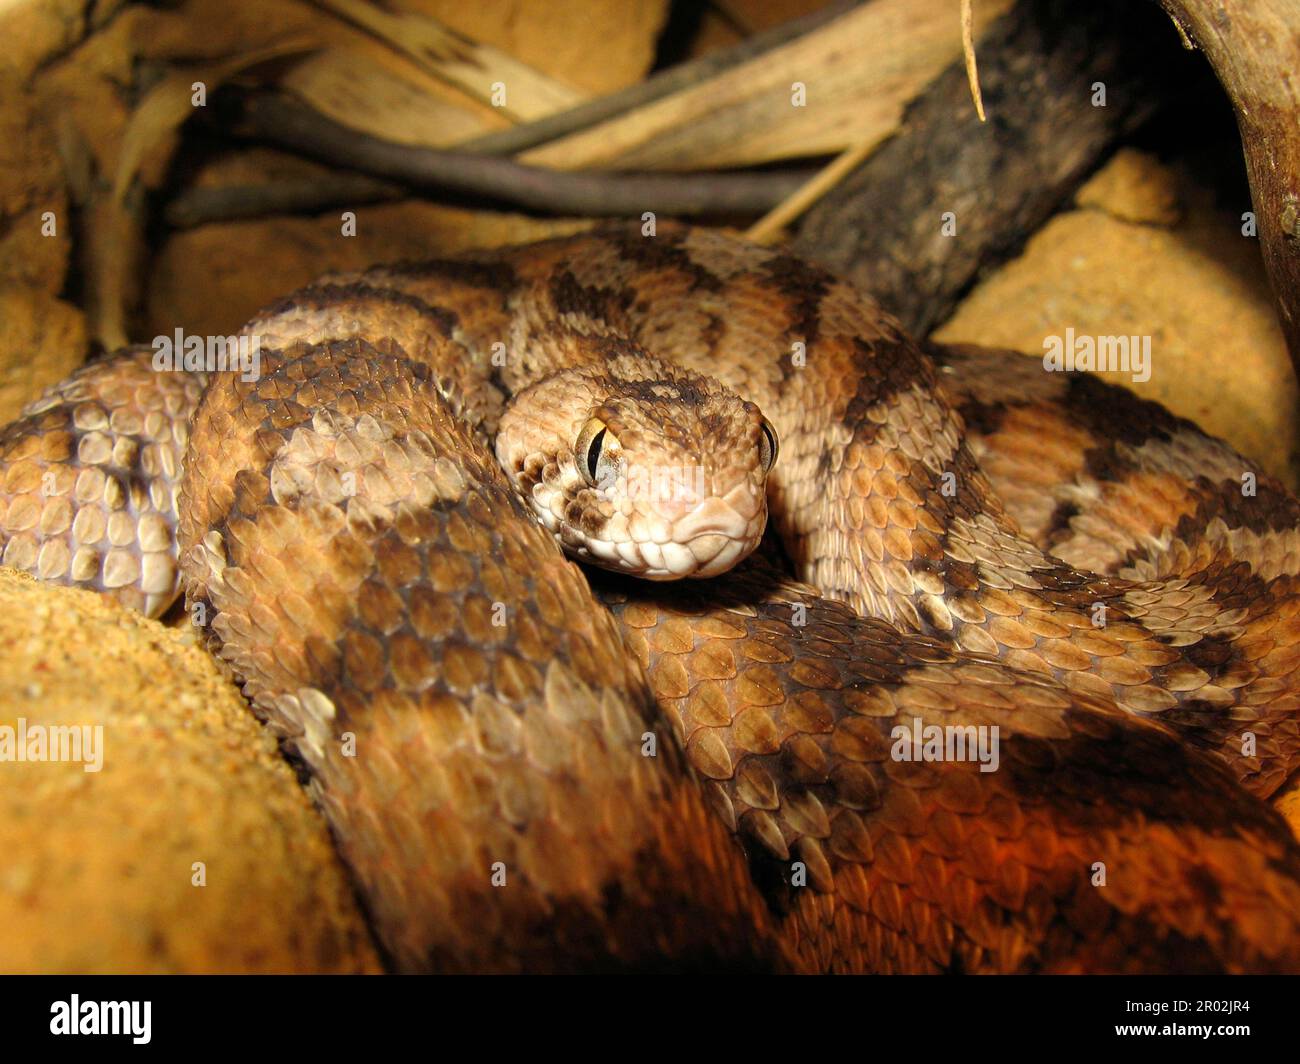 West African sand rattle viper Stock Photo